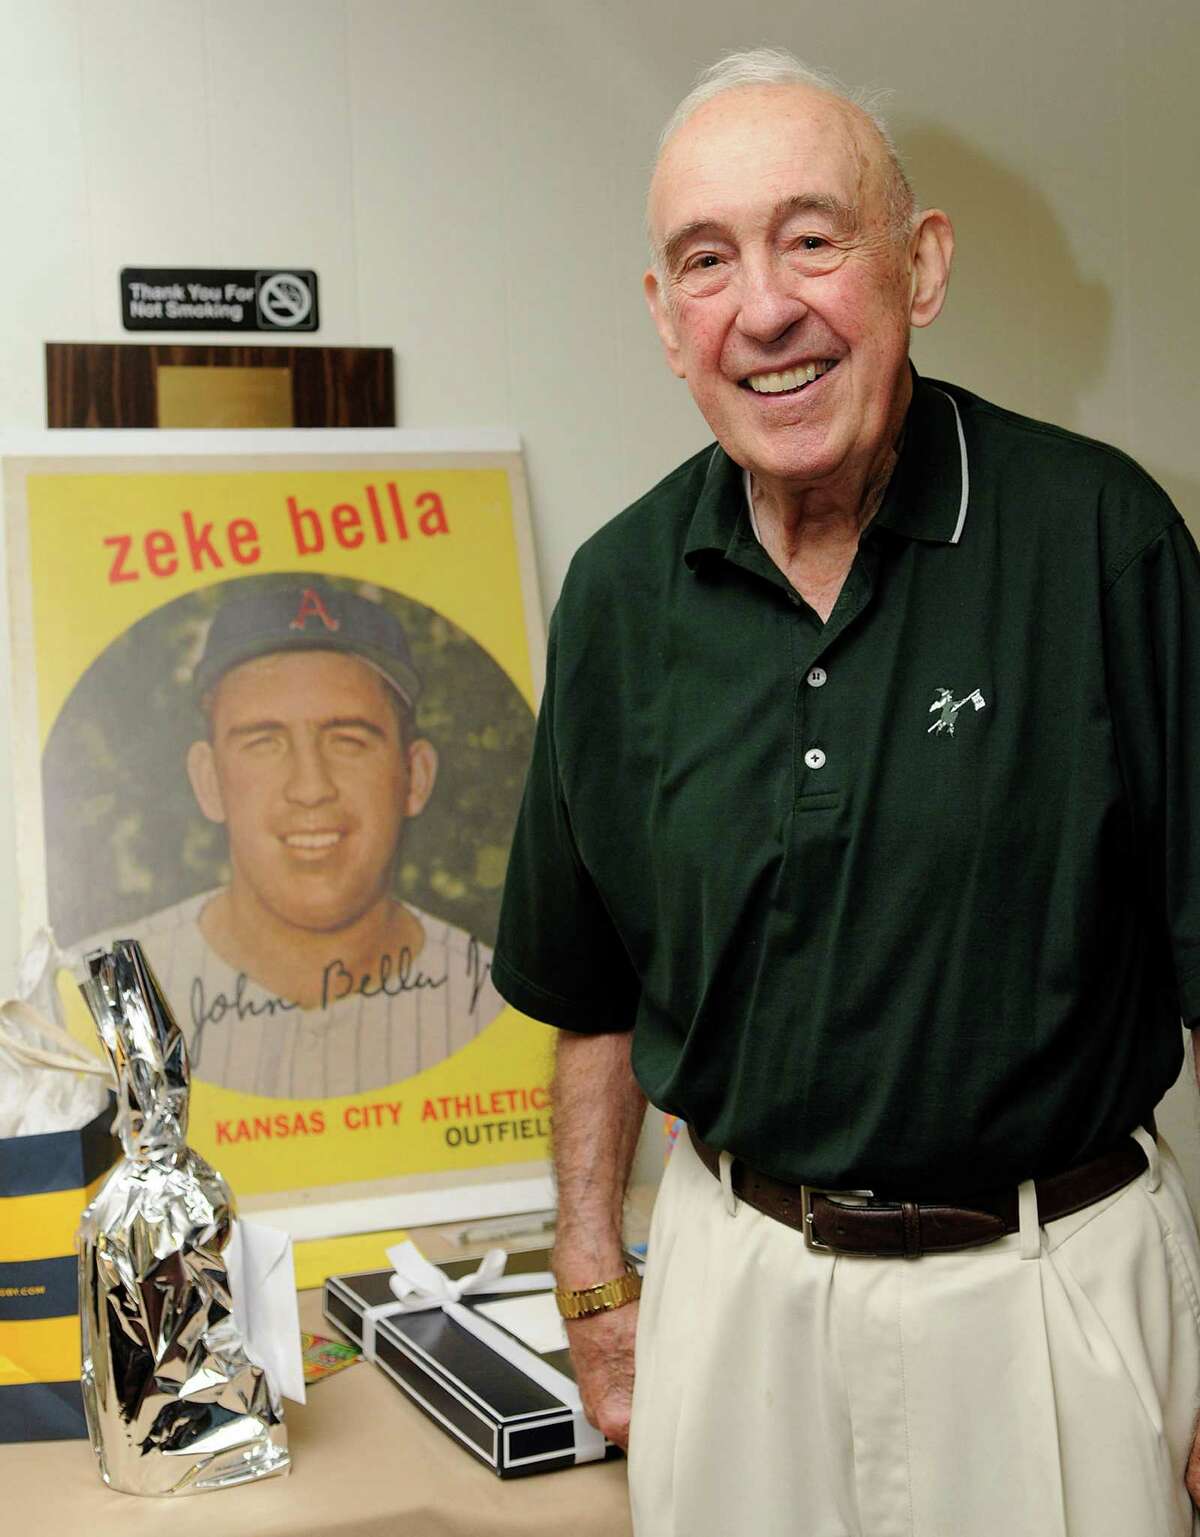 Cos Cob's John "Zeke" Bella, former outfielder for the New York Yankees and Kansas City Athletics, stands in front of a replica of his baseball card during his 80th birthday party with friends and family at the St. Lawrence Club in Cos Cob back in August of 2010.